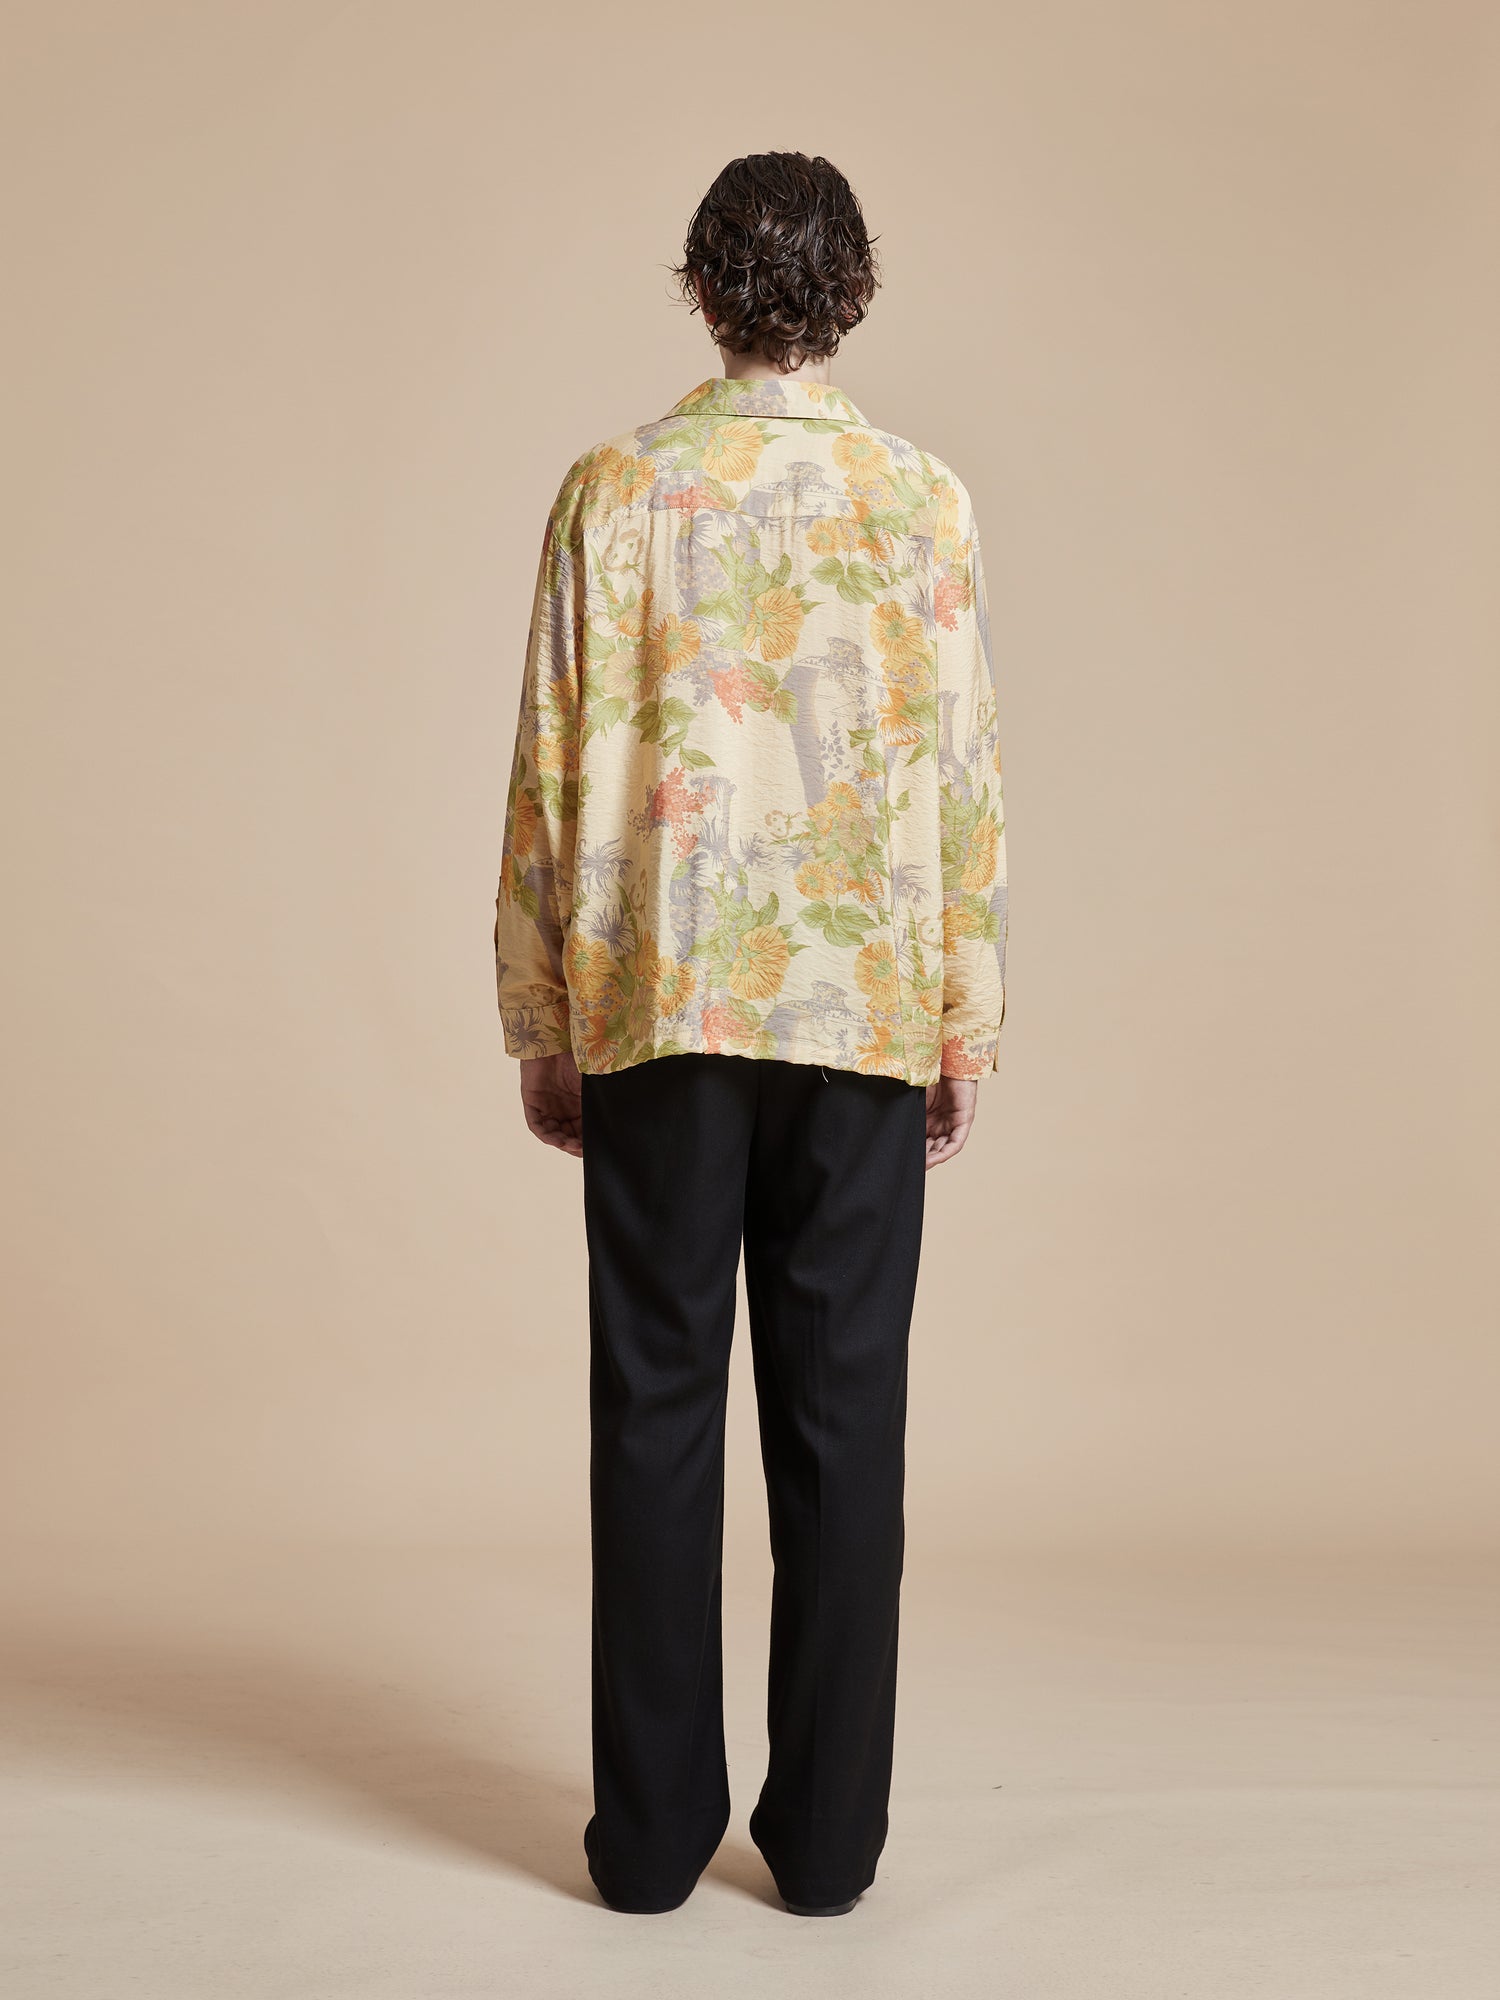 The back view of a man in a yellow floral Found Meraj Vase Pot Long Sleeve Camp Shirt adorned with Phulkari motifs.